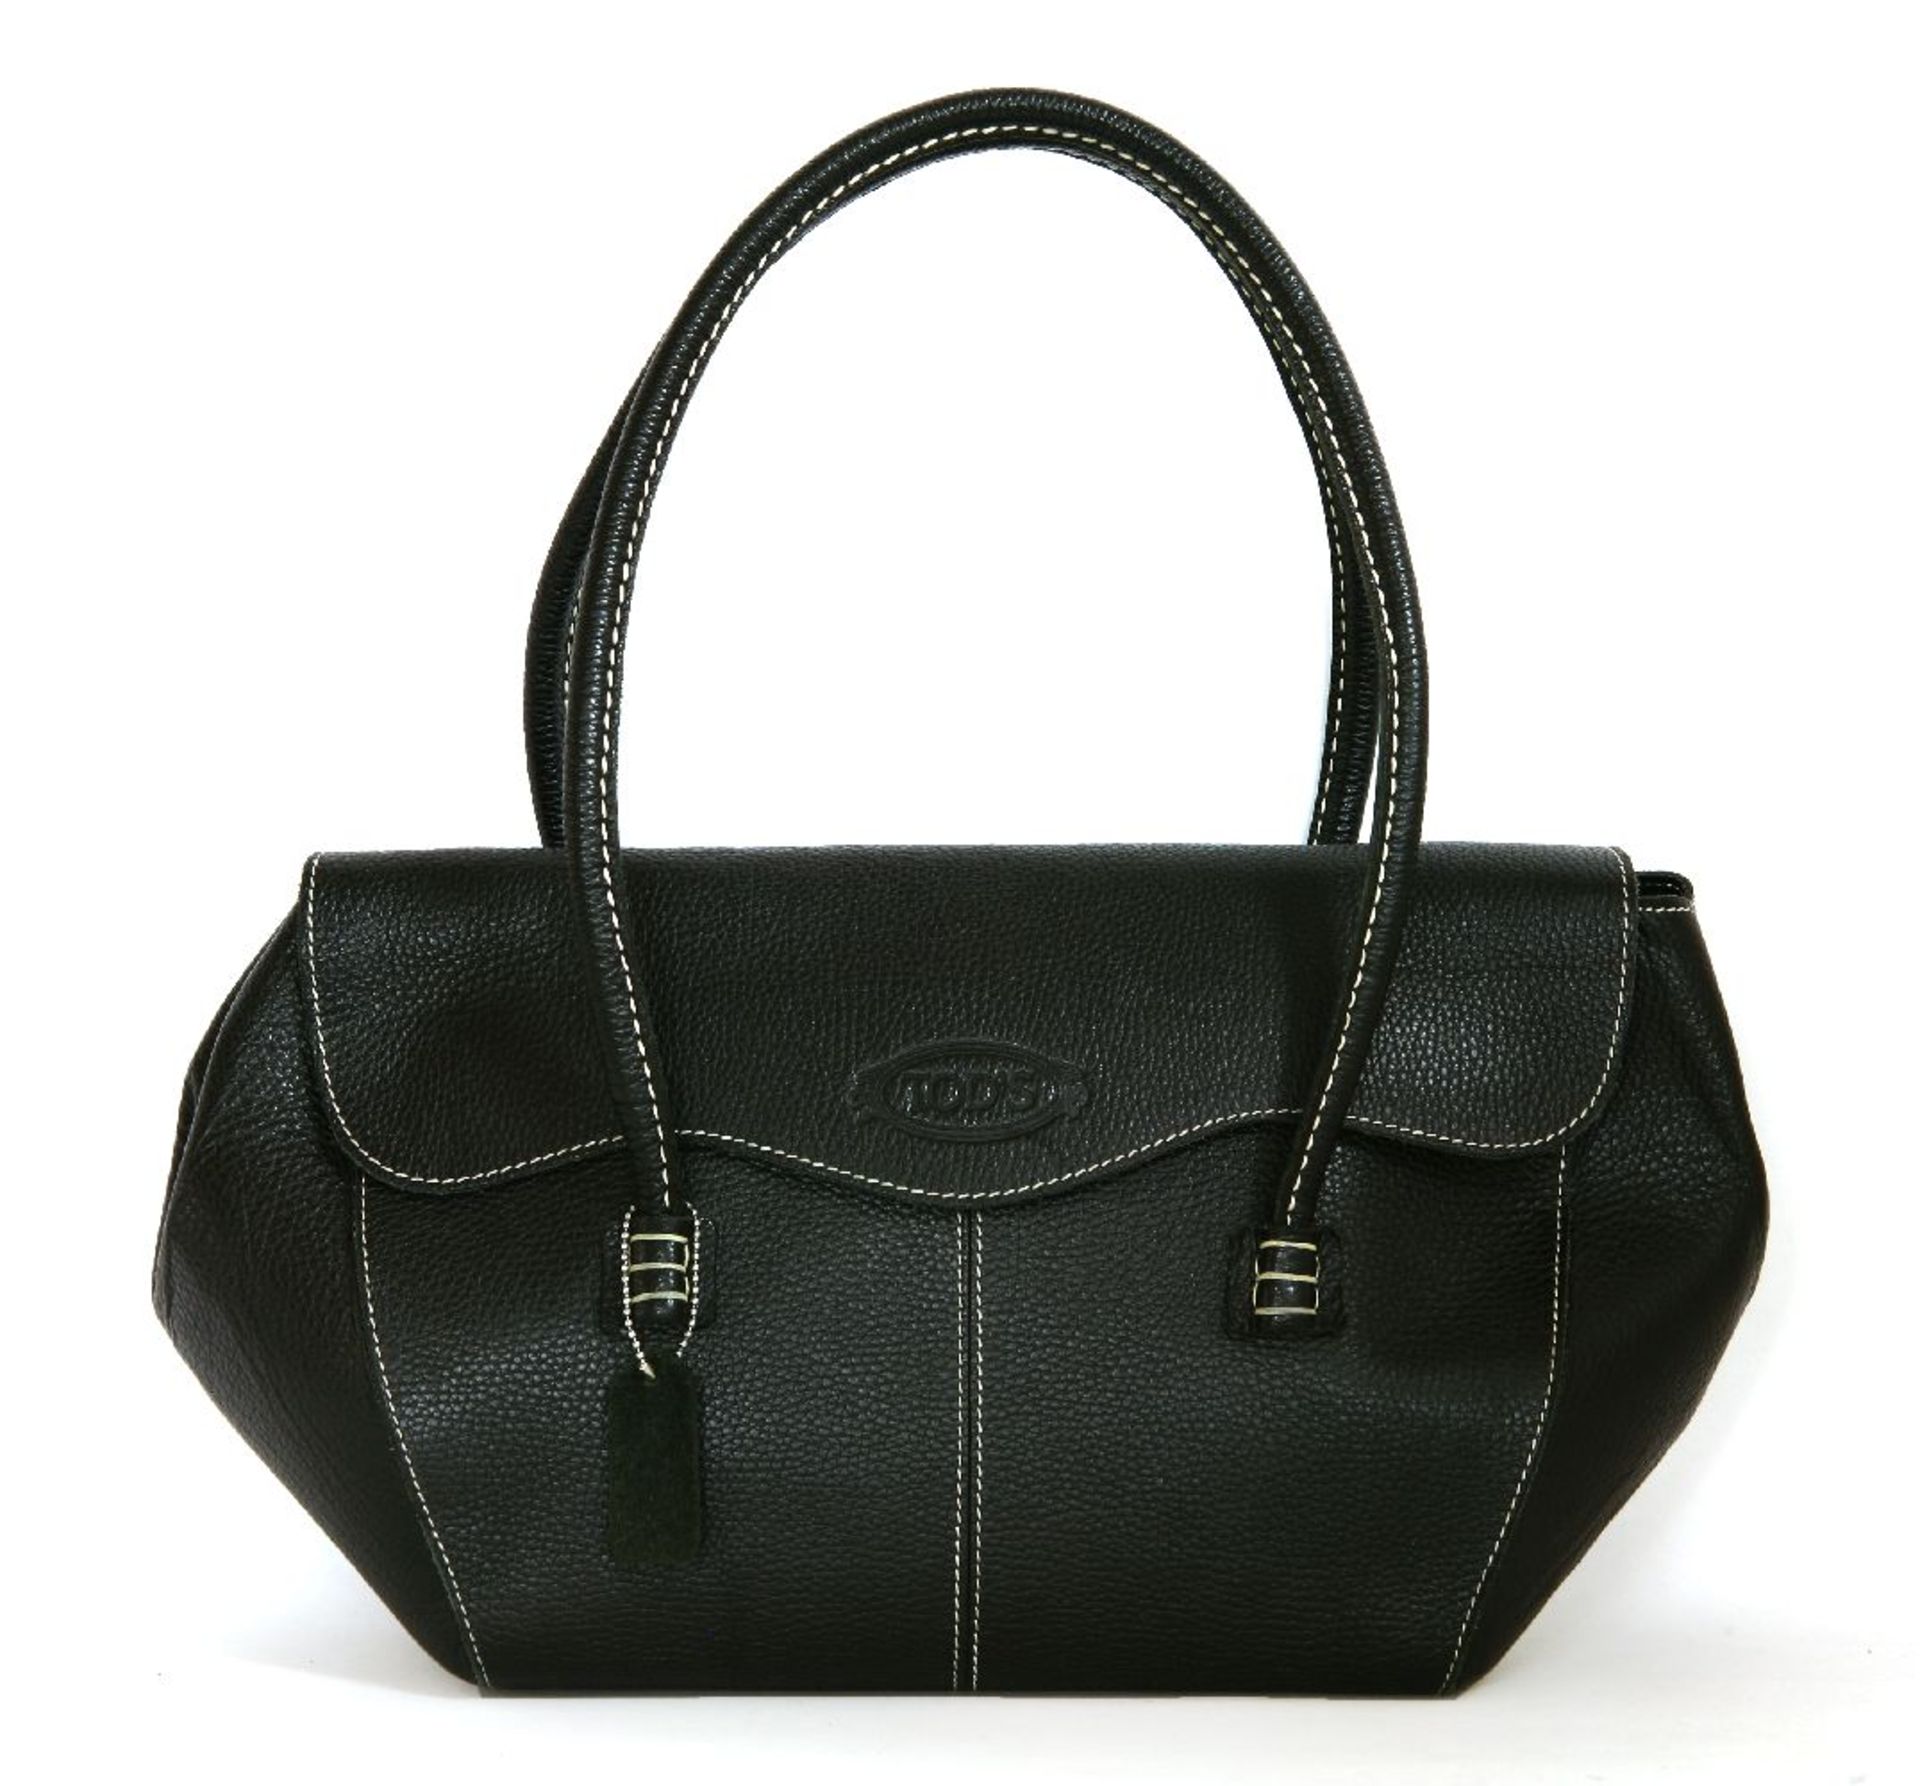 A Todd's black leather handbag,with white stitching detailing, silver-tone hardware and a